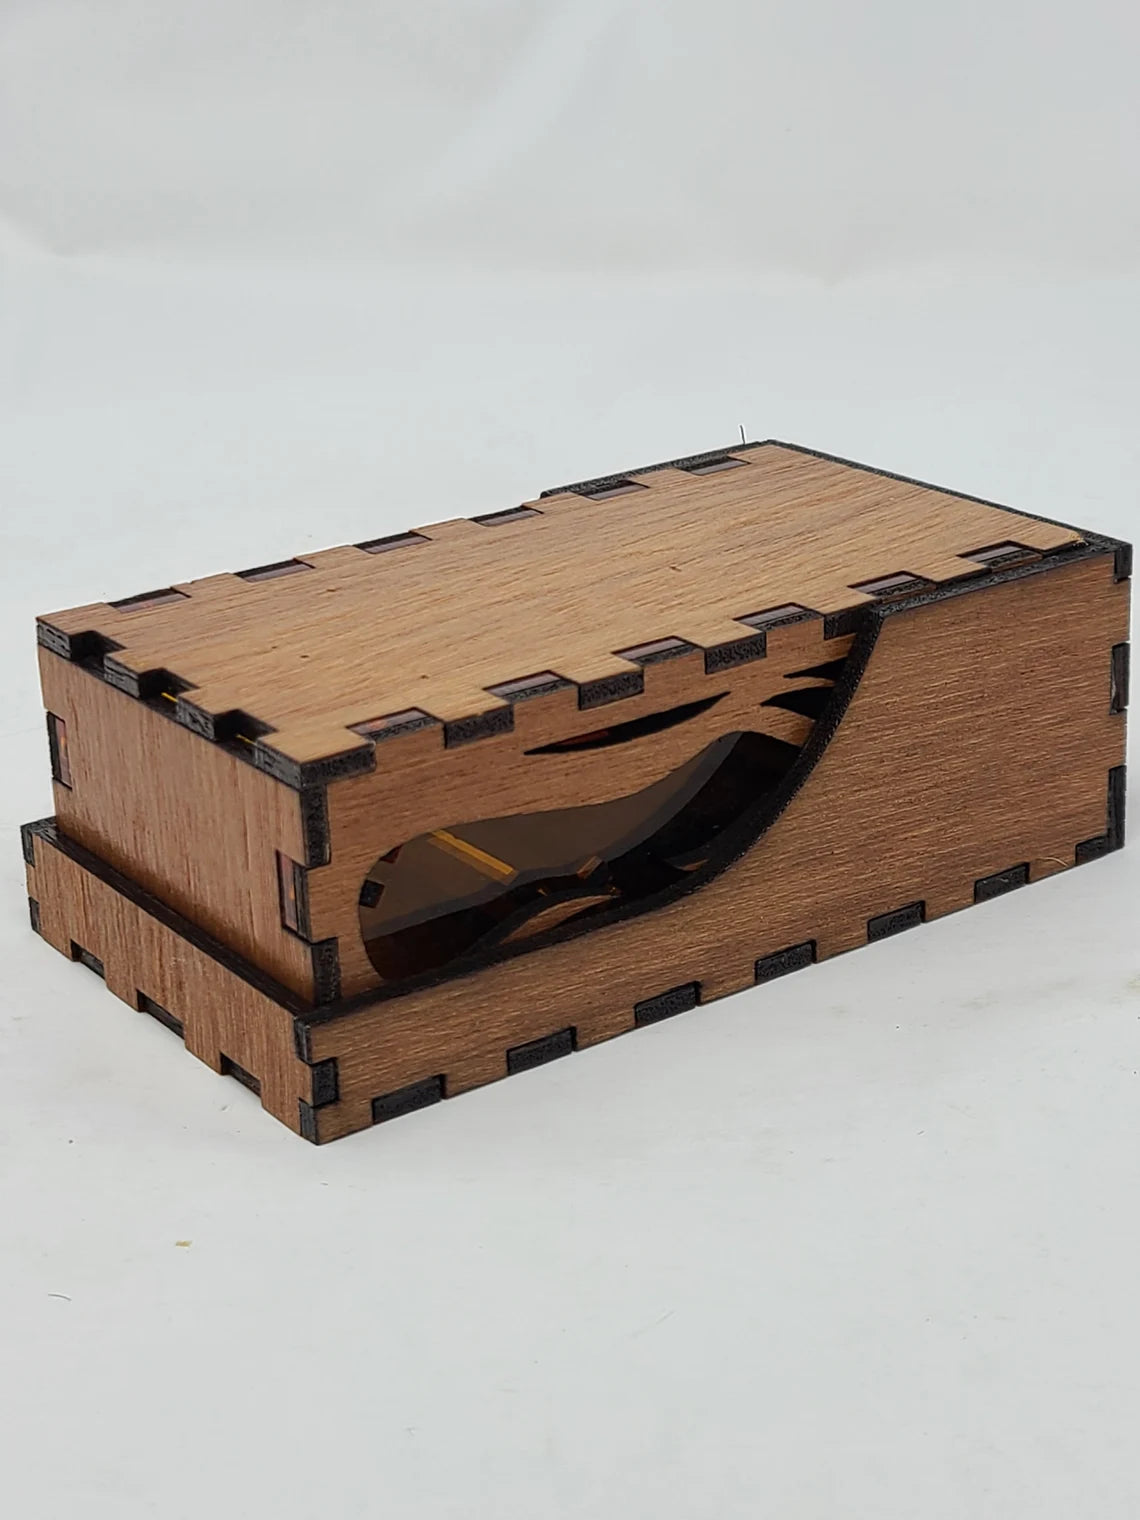 Phoenix - Dice Tower - Traveler 2.0 by Vulcan Forge Creations